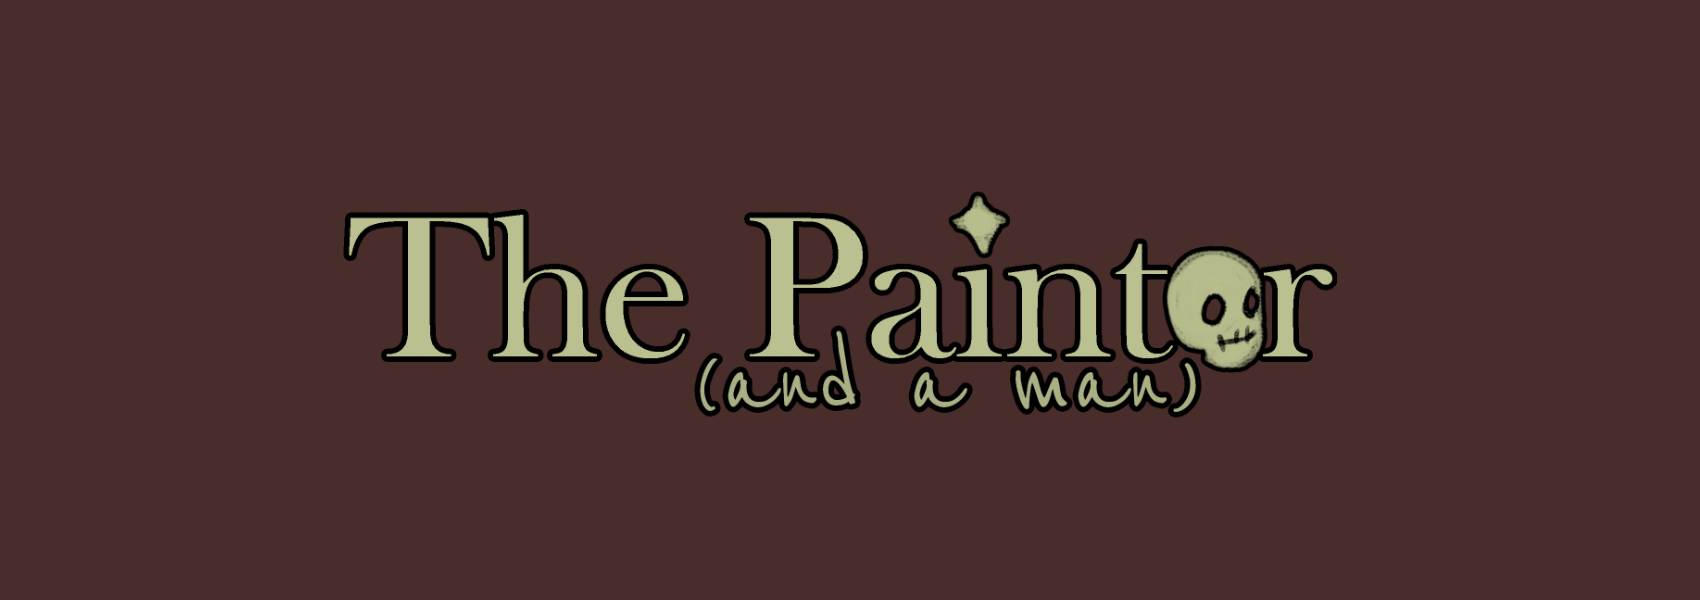 The Painter (and a man)